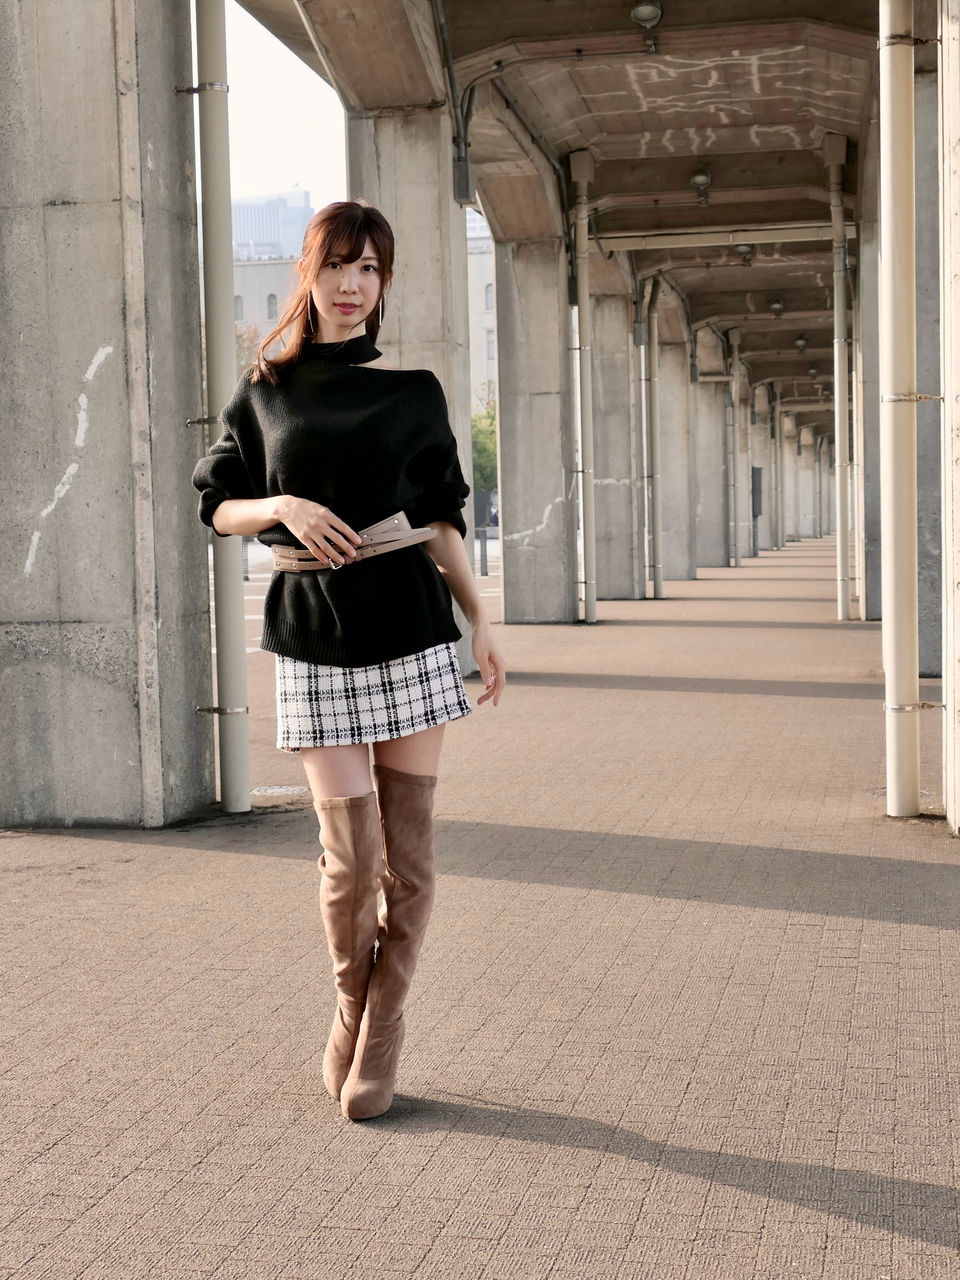 one person, full length, architecture, adult, fashion, spring, women, clothing, young adult, skirt, front view, portrait, built structure, day, footwear, standing, casual clothing, dress, person, photo shoot, wireless technology, lifestyles, hairstyle, city, smiling, emotion, looking at camera, outdoors, female, brown hair